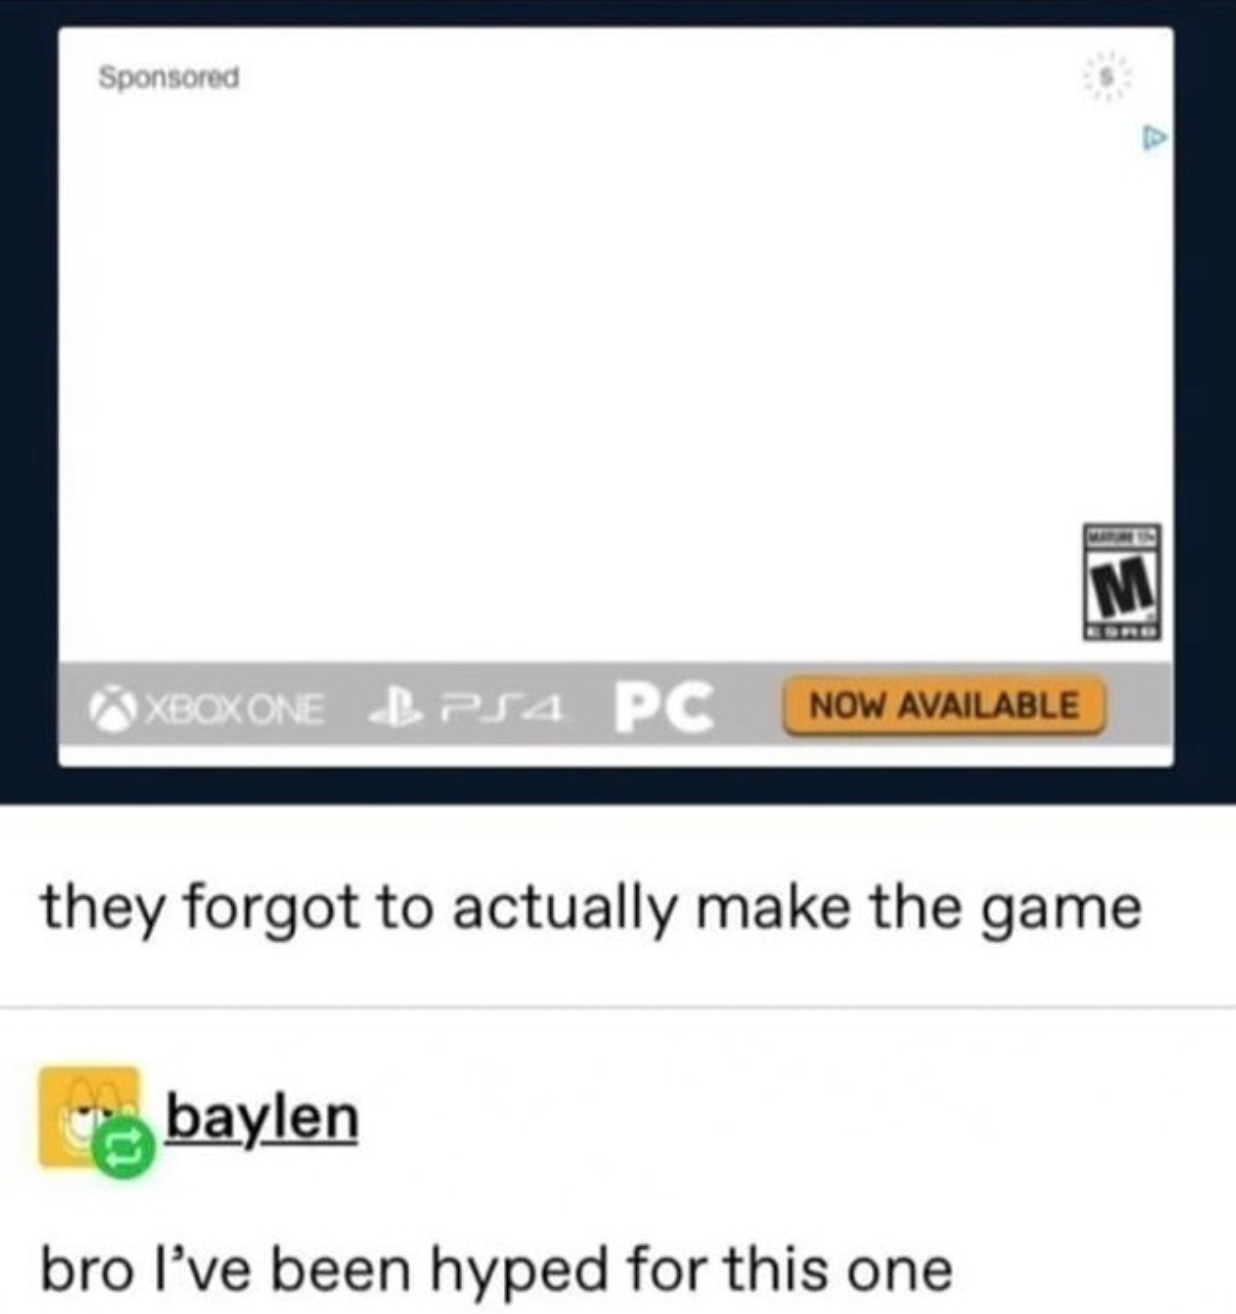 funny gaming memes - web page - Sponsored M Xboxone LPS4 Pc Now Available they forgot to actually make the game baylen bro I've been hyped for this one